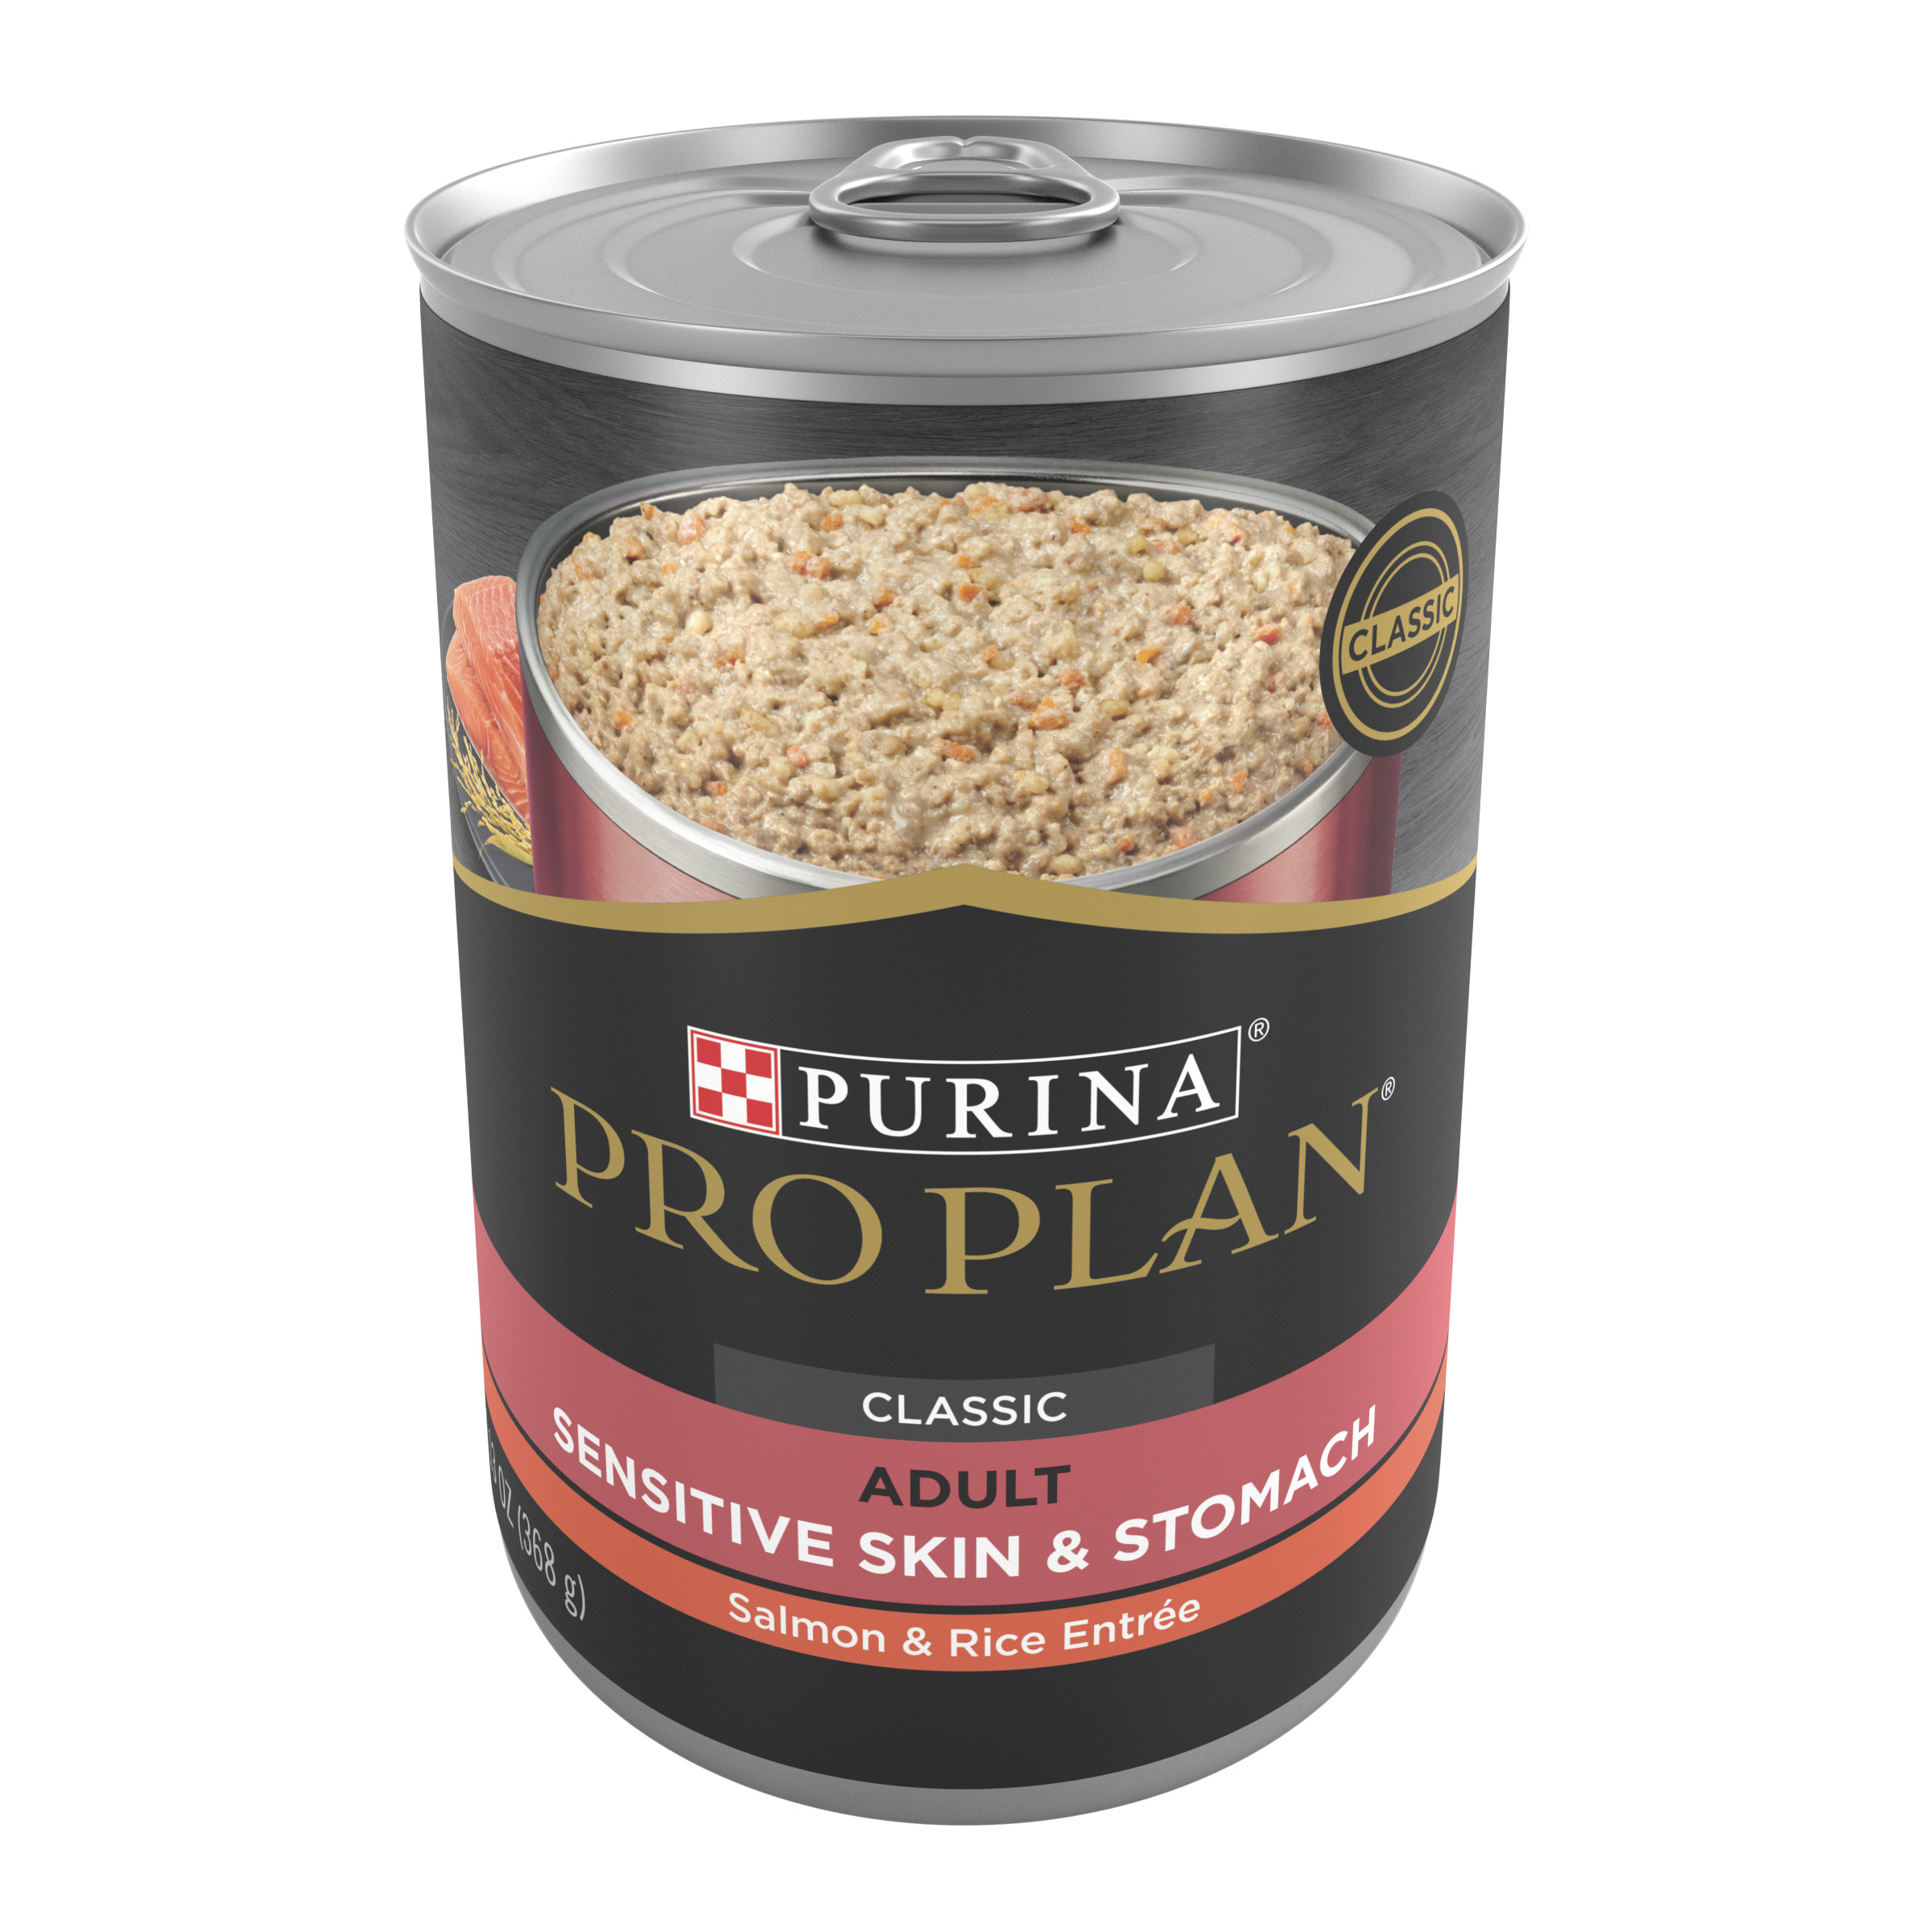 Purina Pro Plan Specialized Adult Wet Dog Food - Sensitive Skin & Stomach